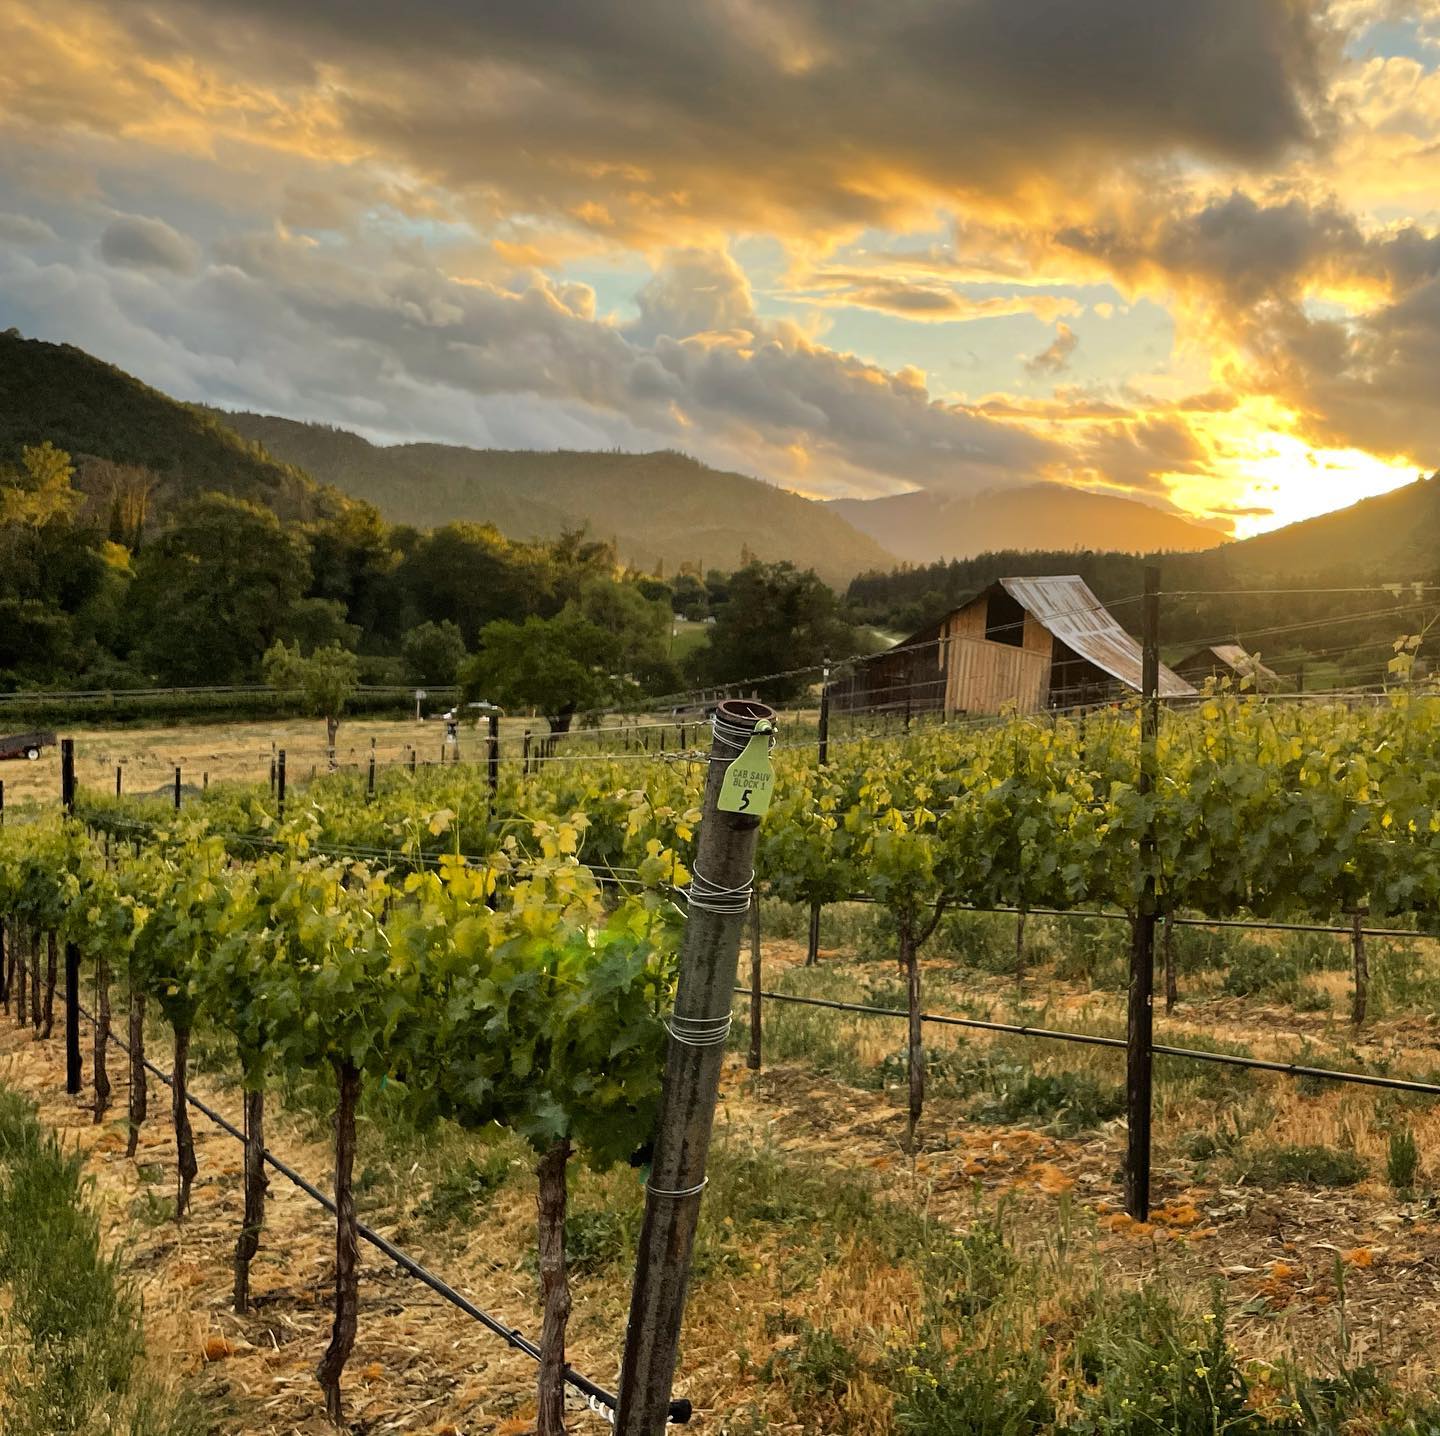 A new tasting room is in the works at Crooked Barn Vineyard where they grows grapes and crafts wine from Bordeaux varietals in the Applegate Valley.